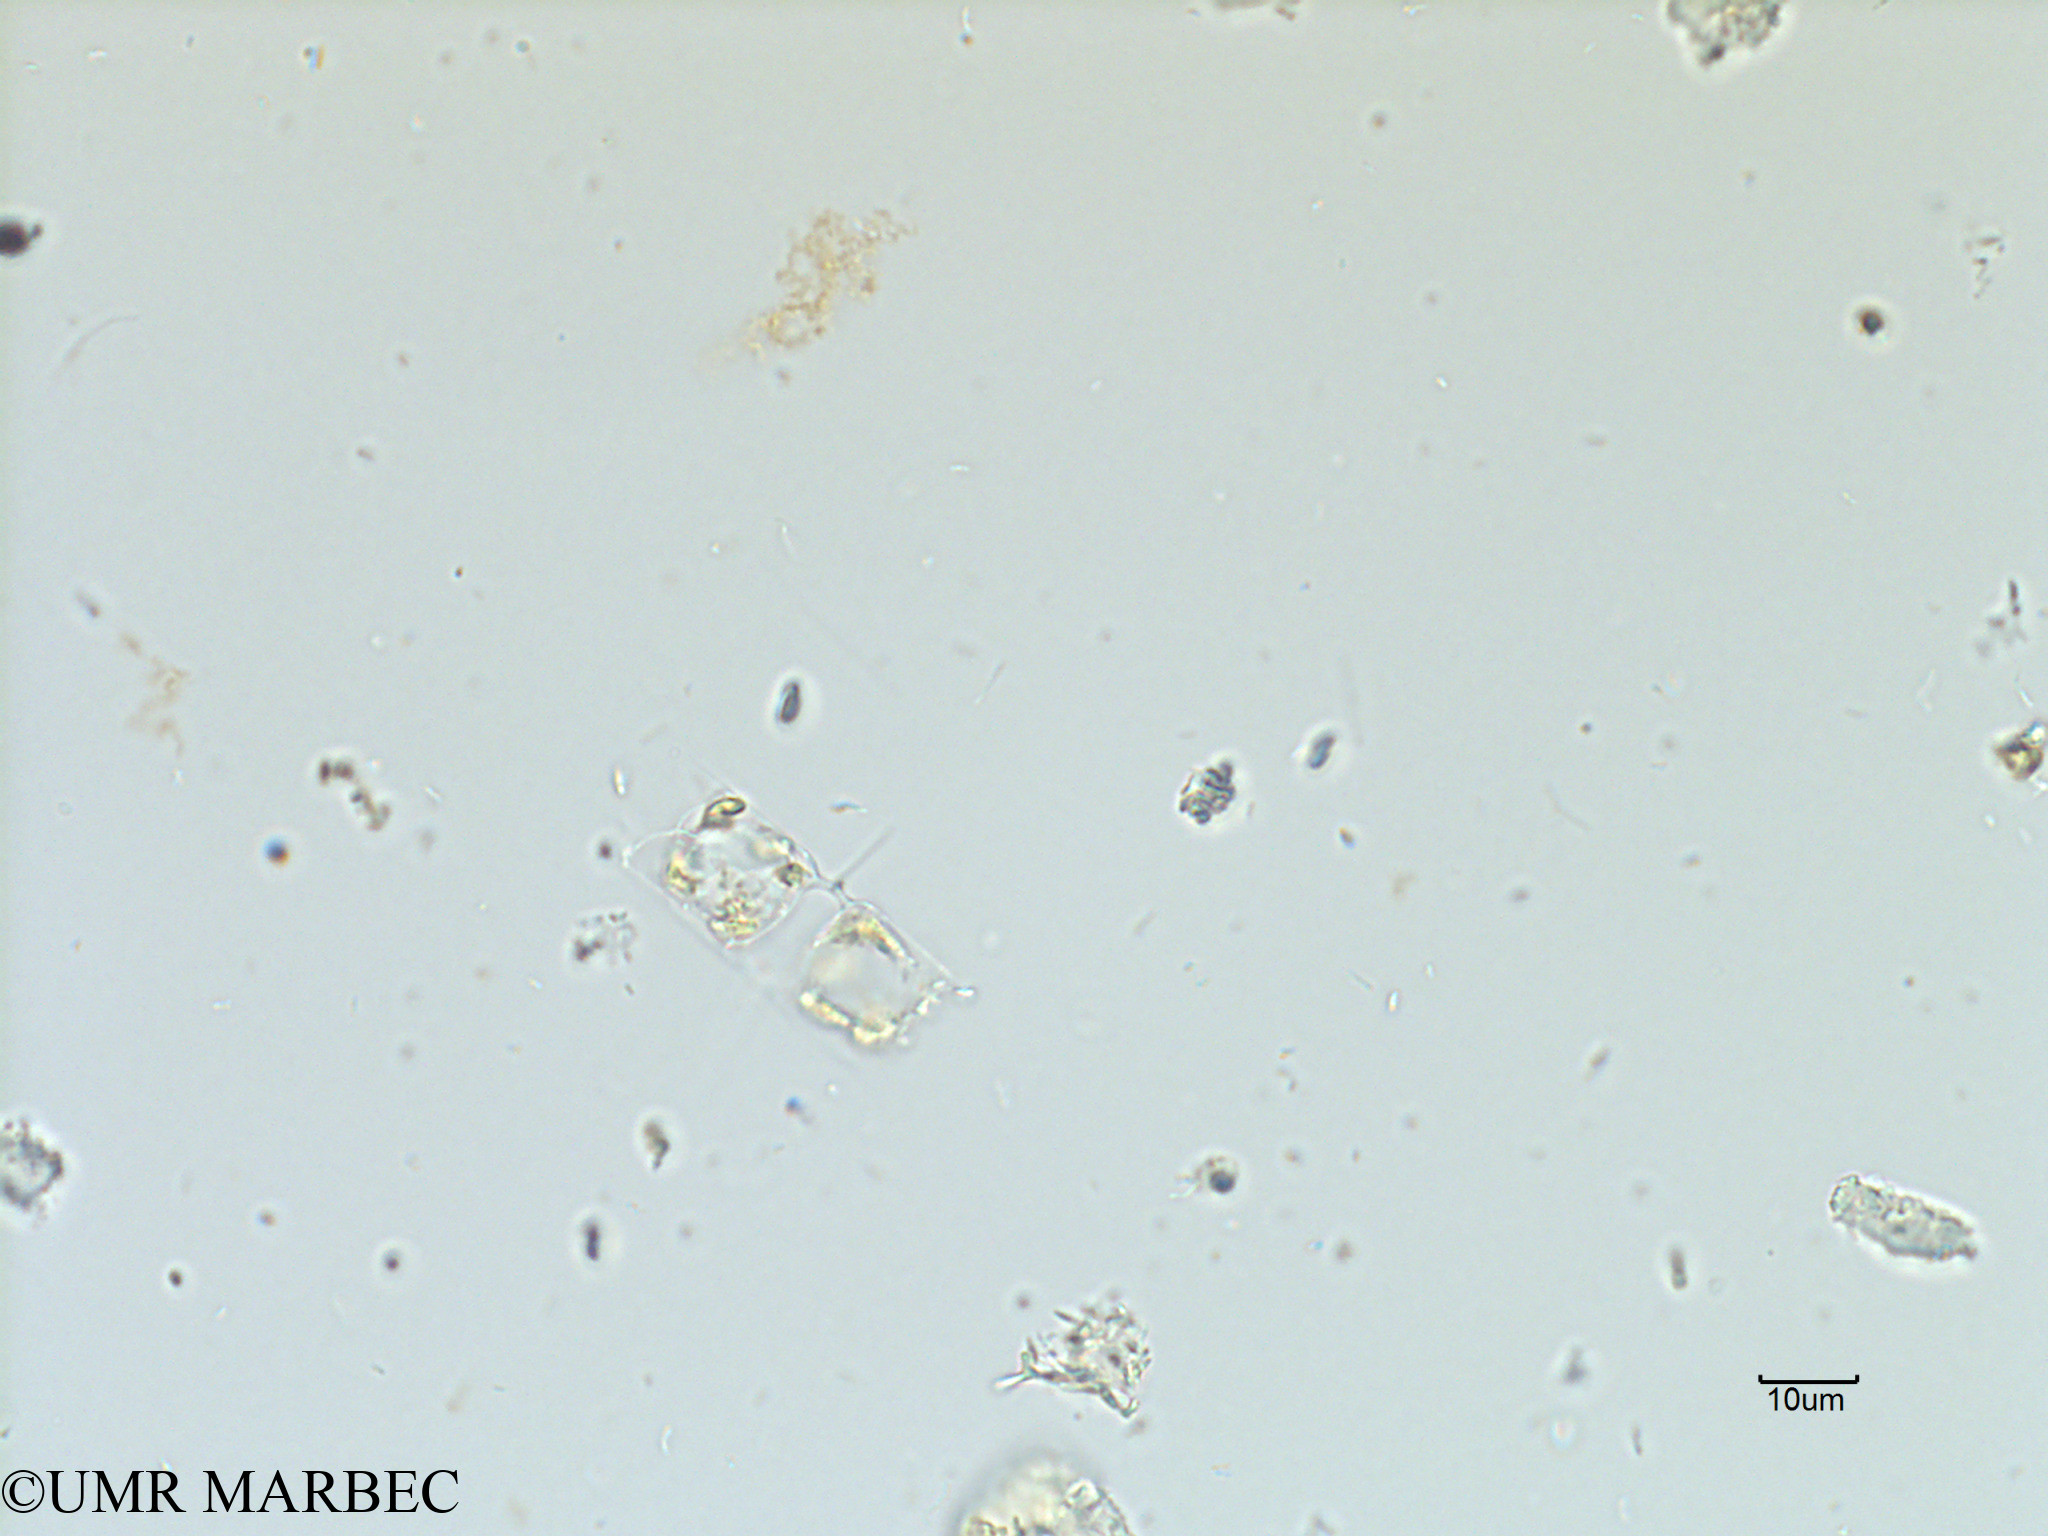 phyto/Scattered_Islands/iles_glorieuses/SIREME November 2015/Chaetoceros sp23 (SIREME-Glorieuses2015-ech6-211116-photo27 ch sp22)(copy).jpg